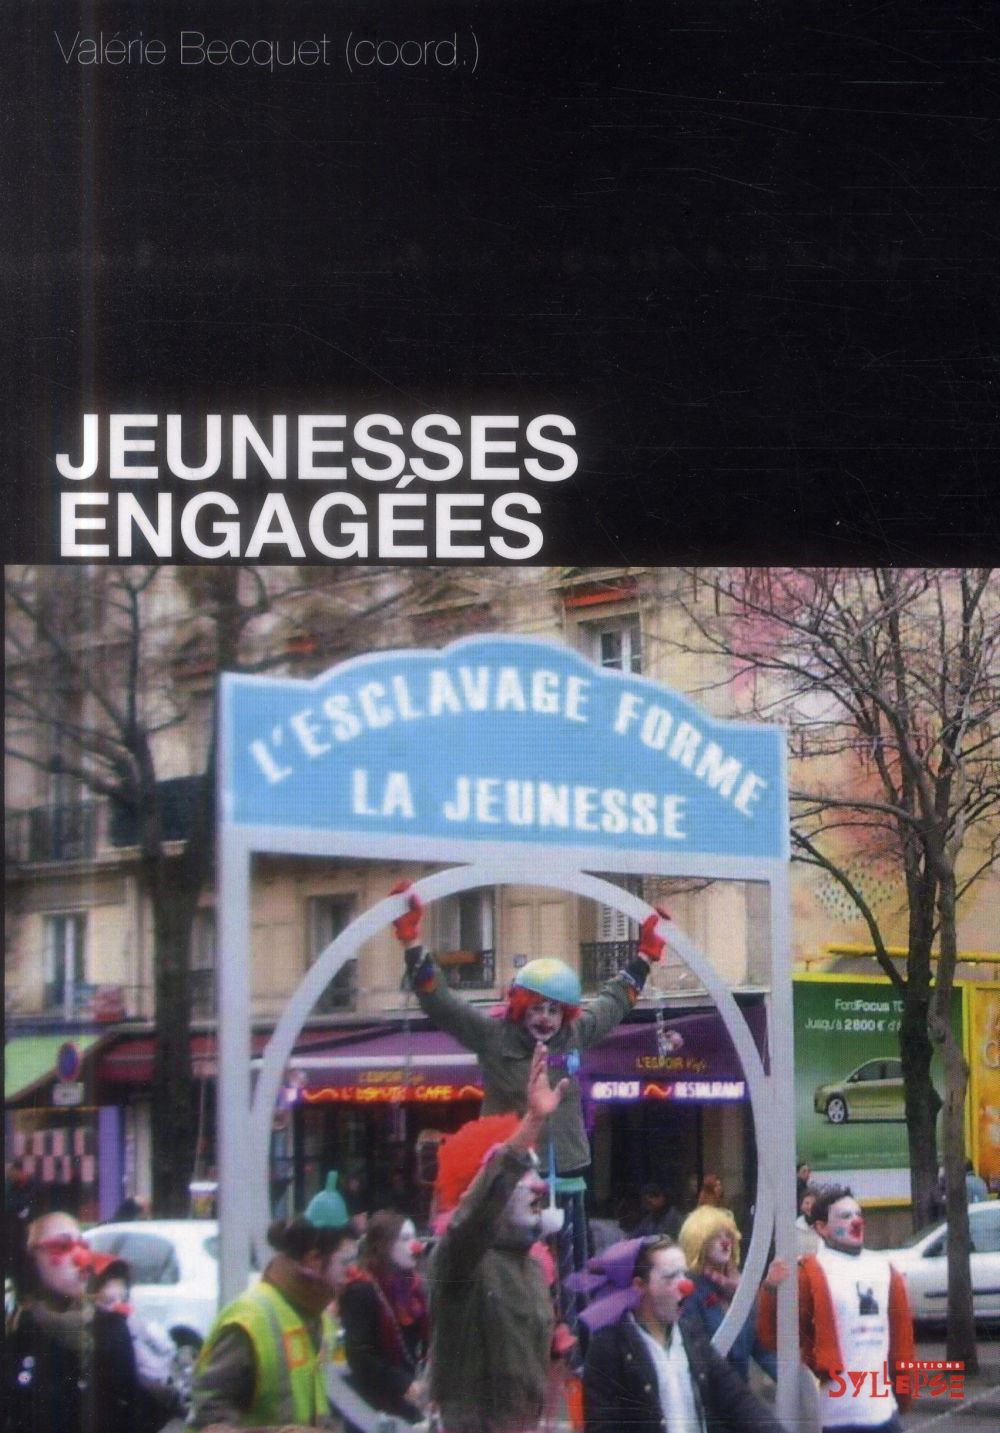 JEUNESSES ENGAGEES